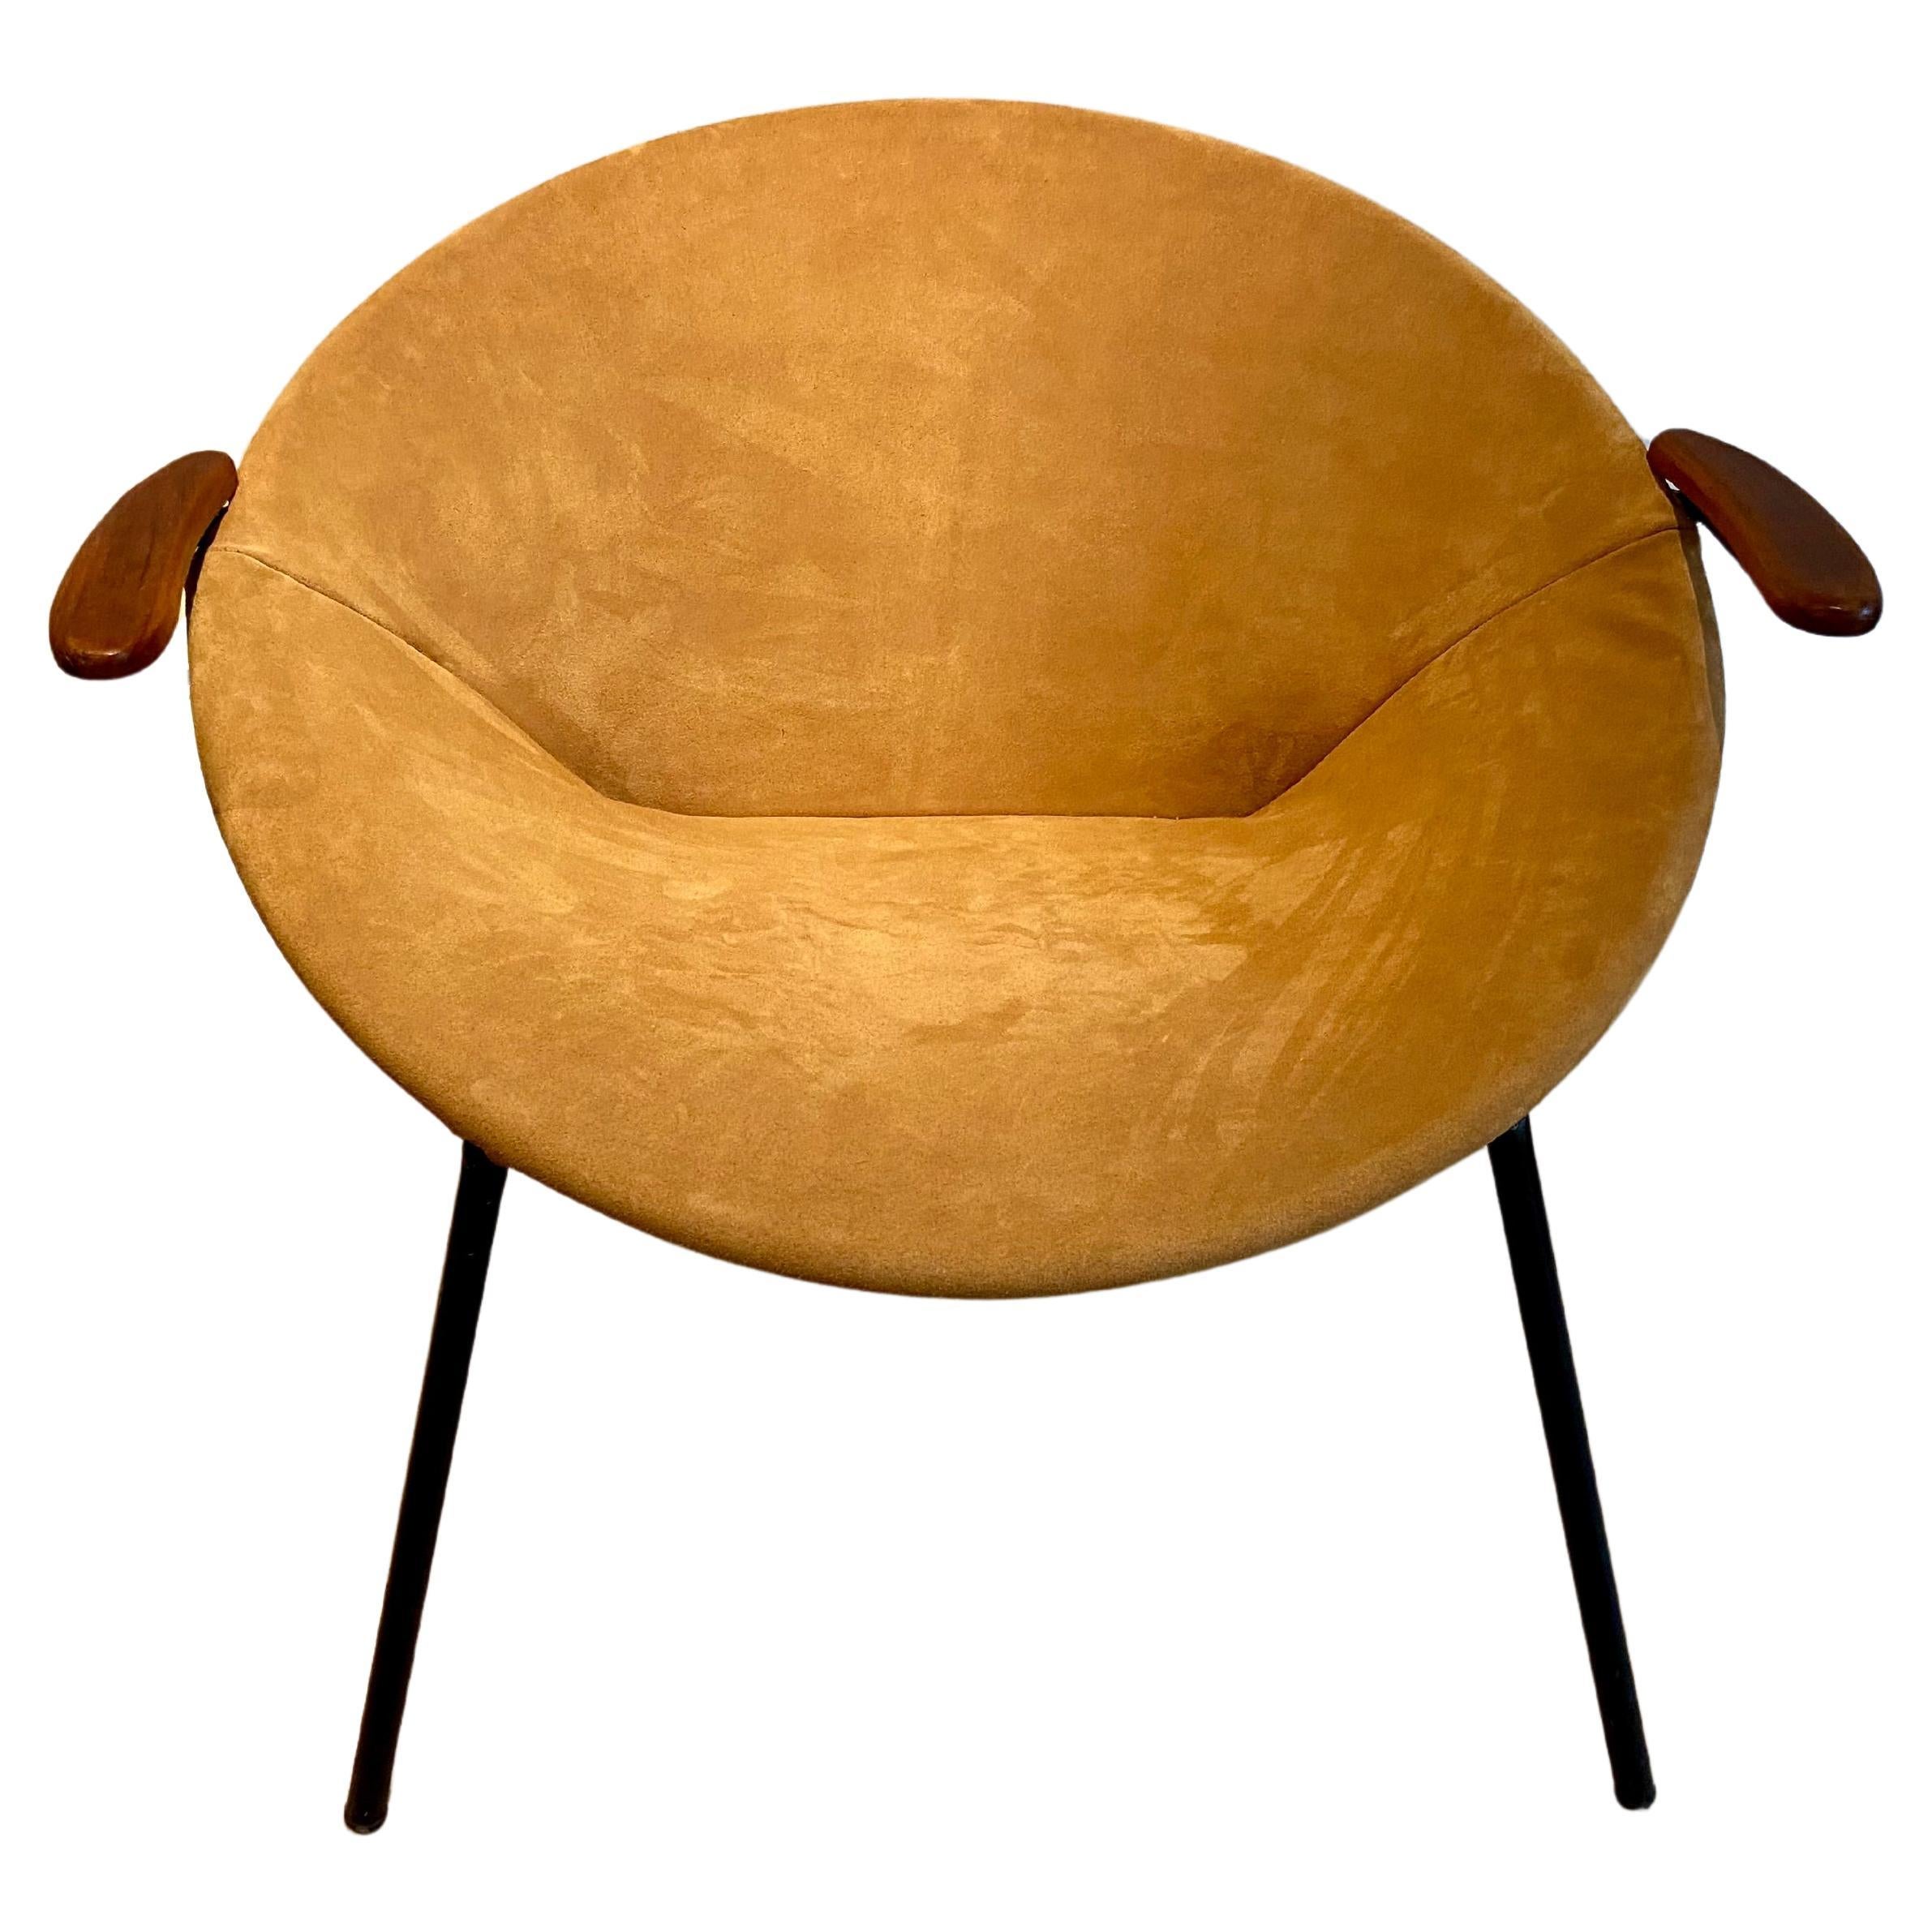 Balloon chair in yellow suede of Hans Olsen by LEA-design.
Armrest in teak, iron frame finished in black.
 